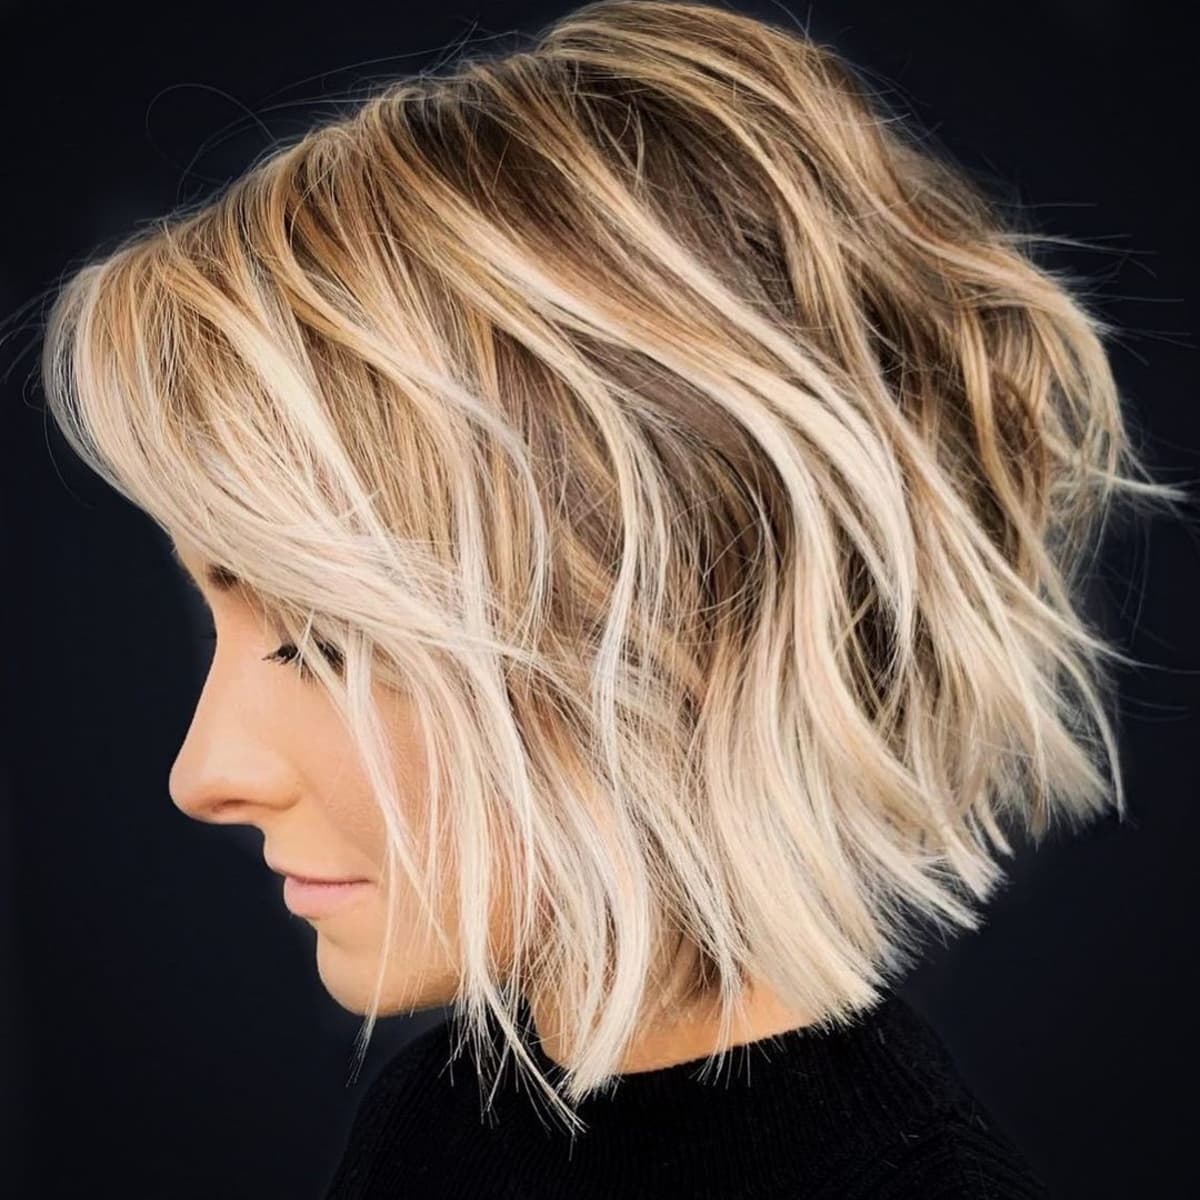 The best short wavy haircut with texture